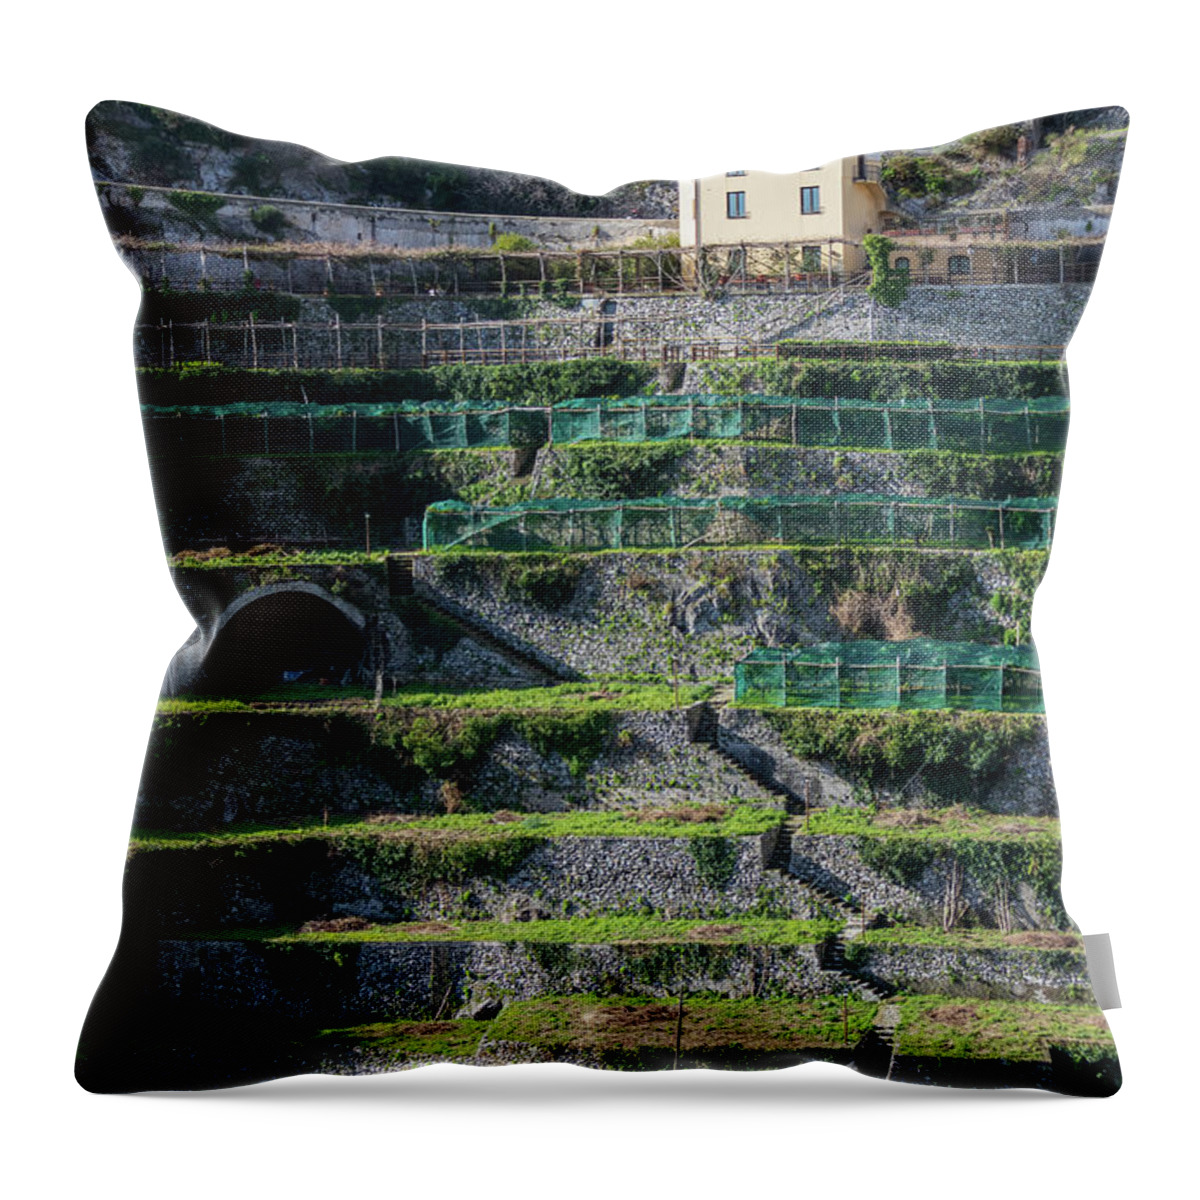 Amalfi Throw Pillow featuring the photograph House on Lemon Terracing by Umberto Barone